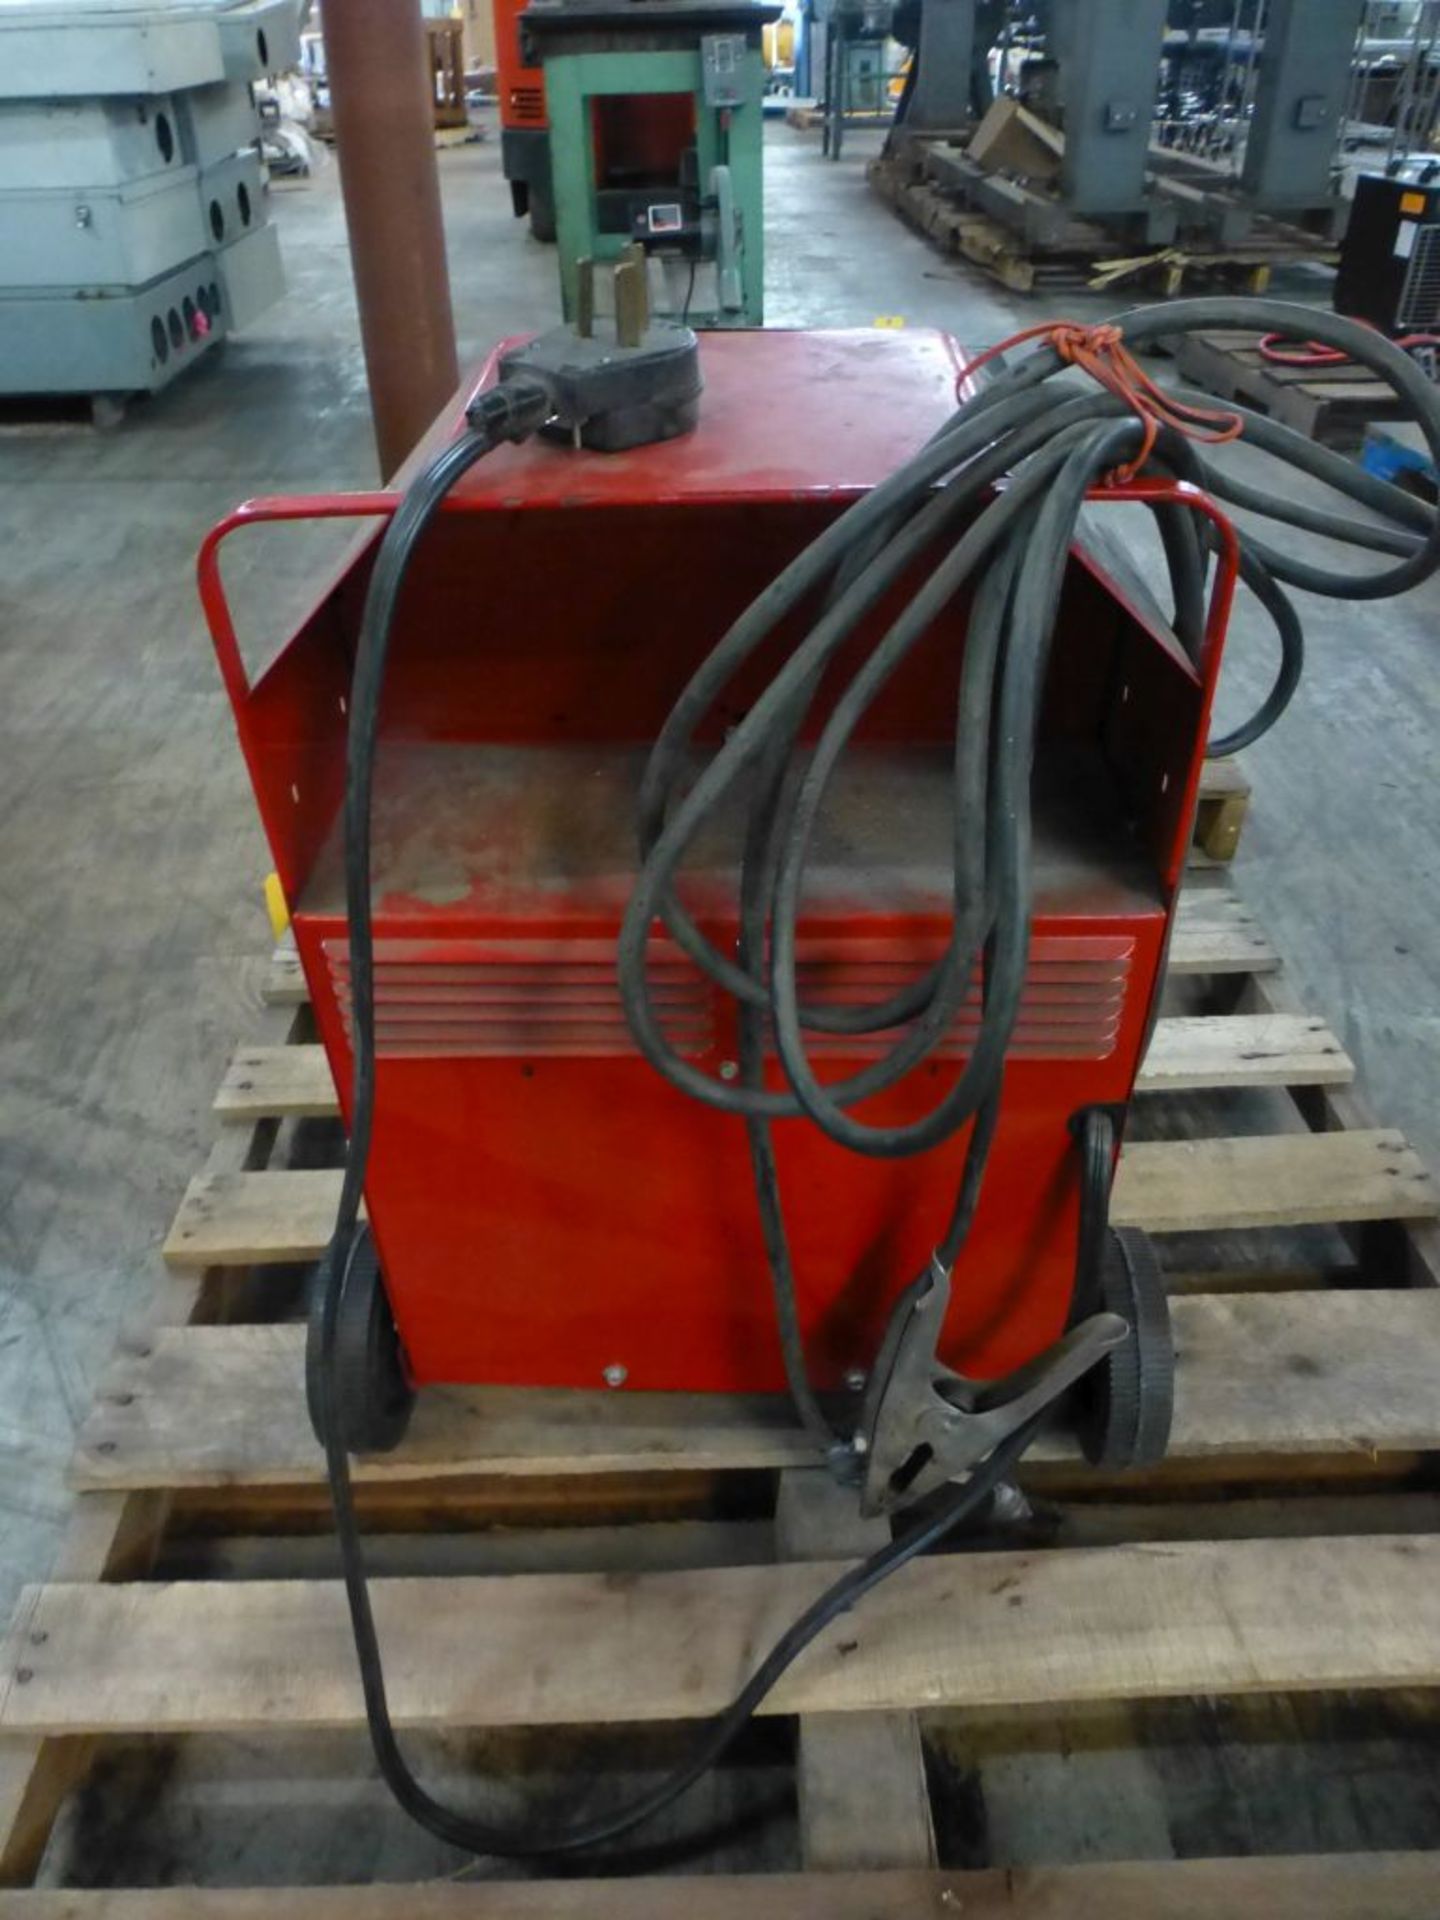 Lincoln AC-225 Arc Welder - 220V Single Phase; Tag: 218512 - Image 3 of 7